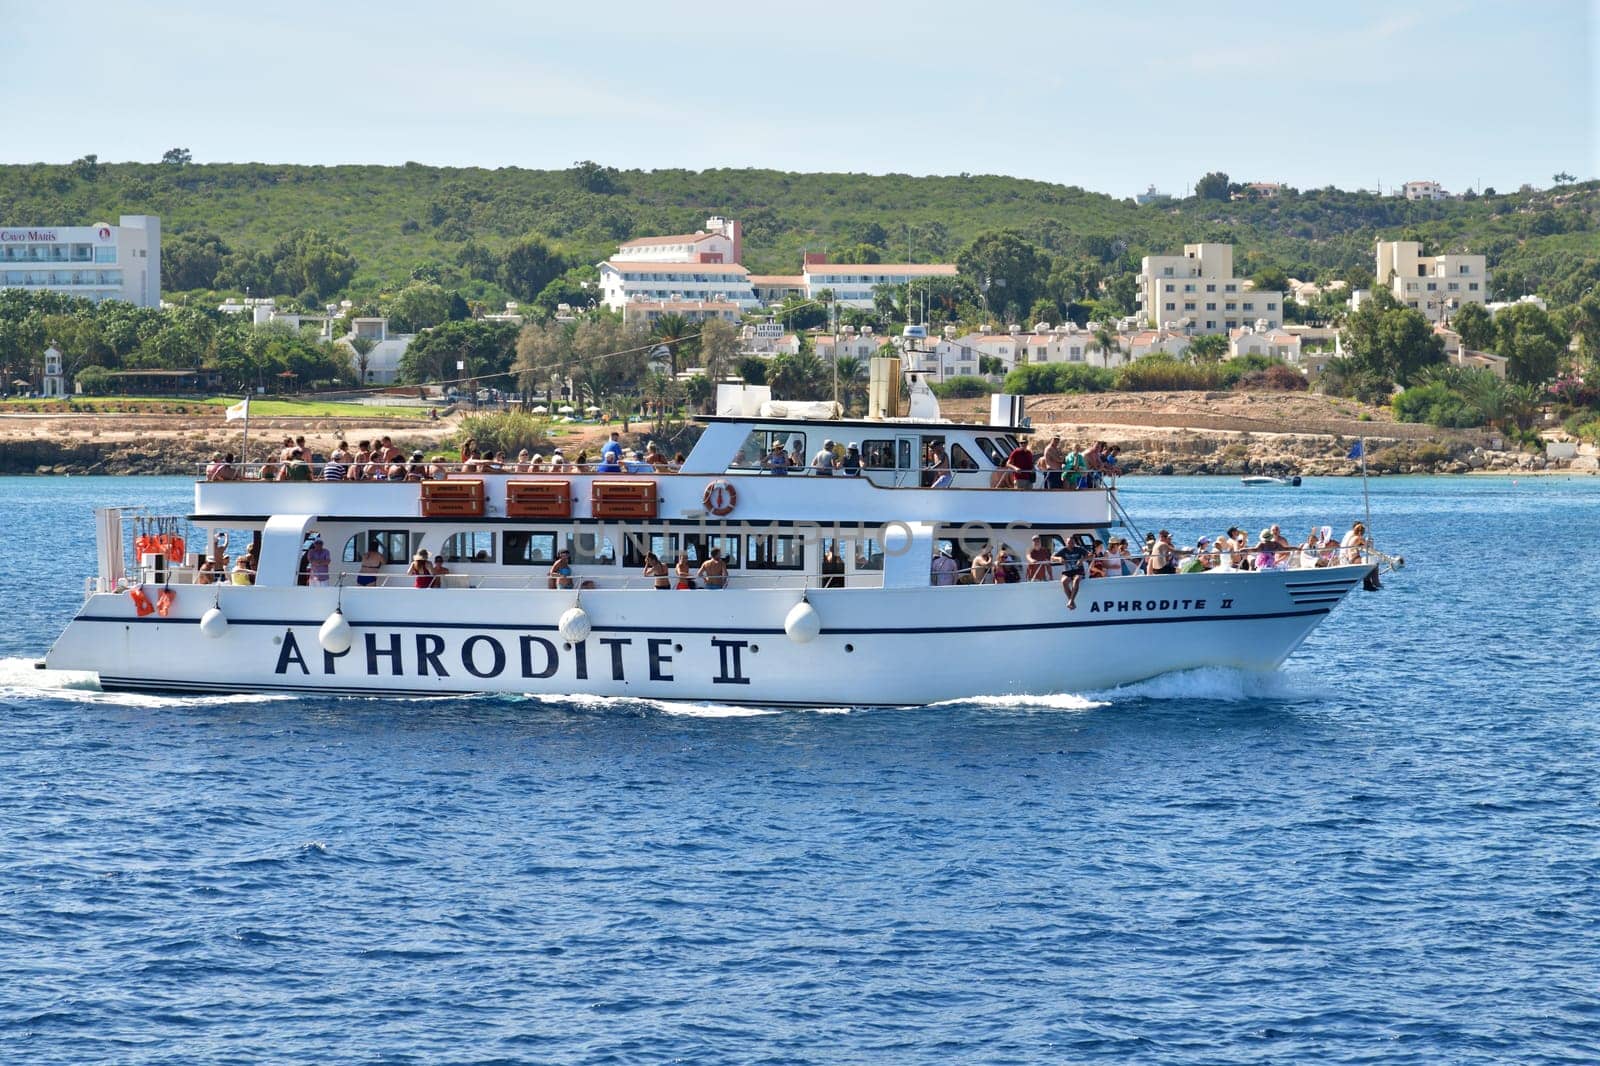 Protaras, Cyprus - Oct 10. 2019. Aphrodite II -Sightseeing ship with the tourists sets sail